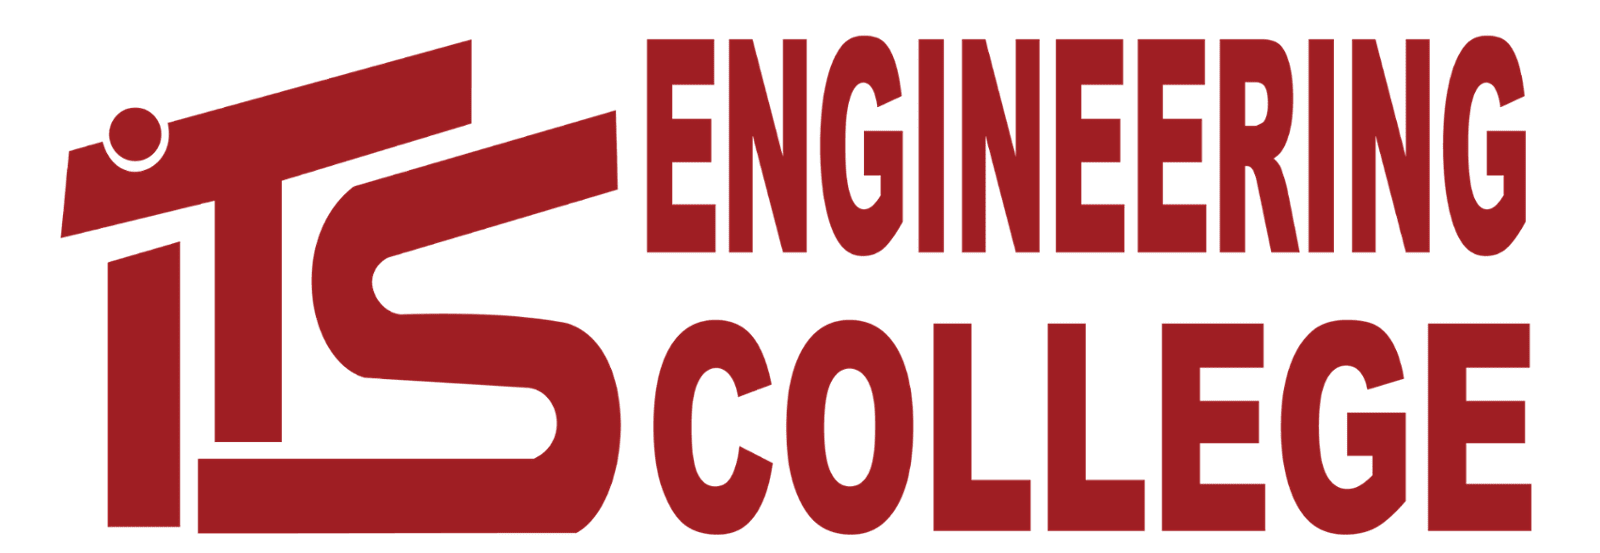 ITS Engineering College|Colleges|Education